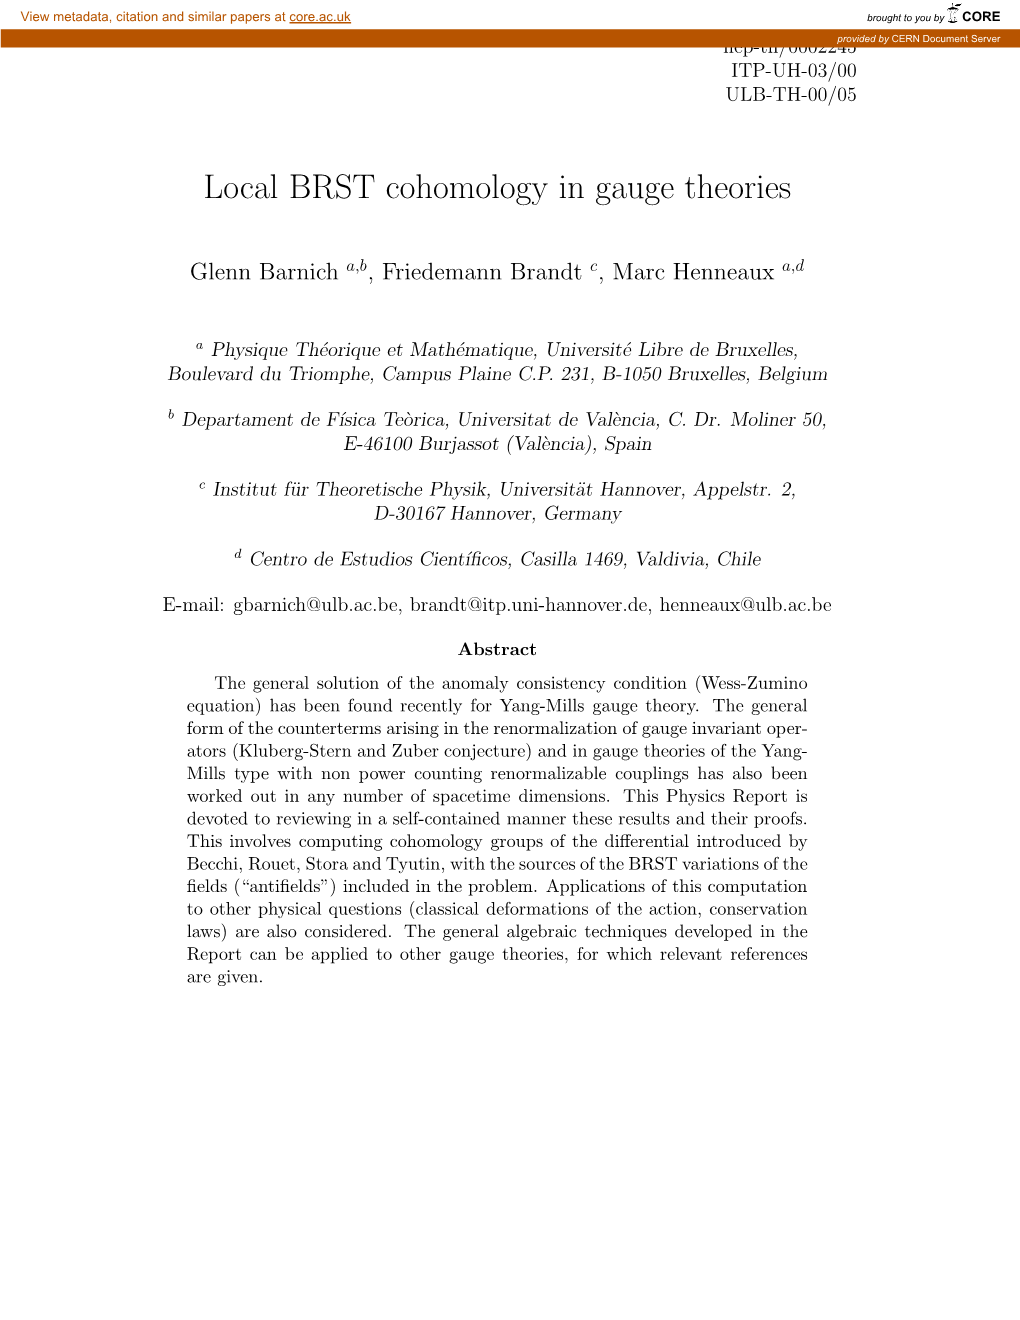 Local BRST Cohomology in Gauge Theories